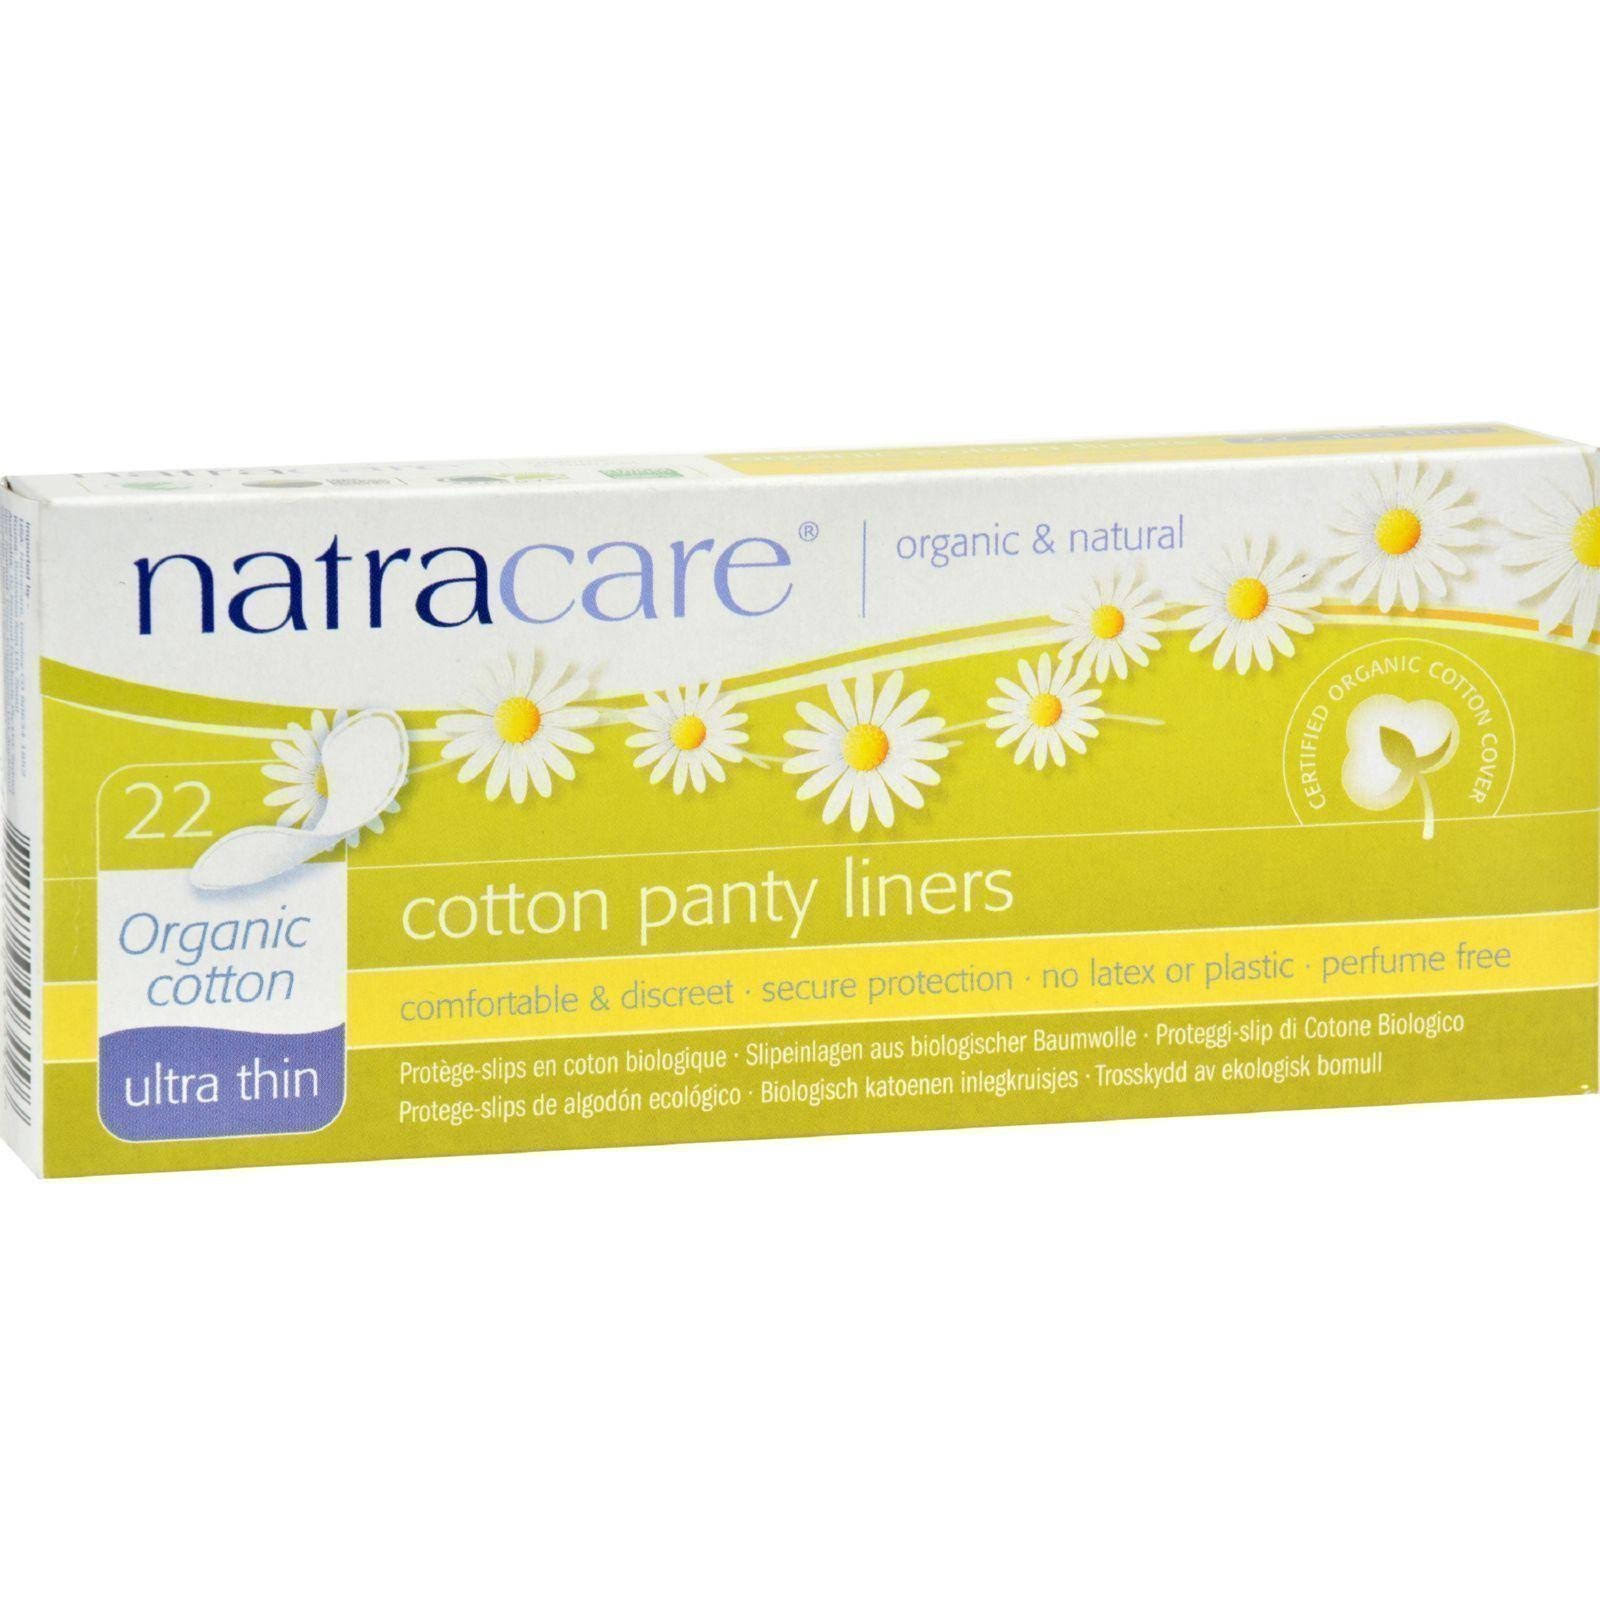 Natracare Ultra Thin Cotton Panty Liners - 22ct